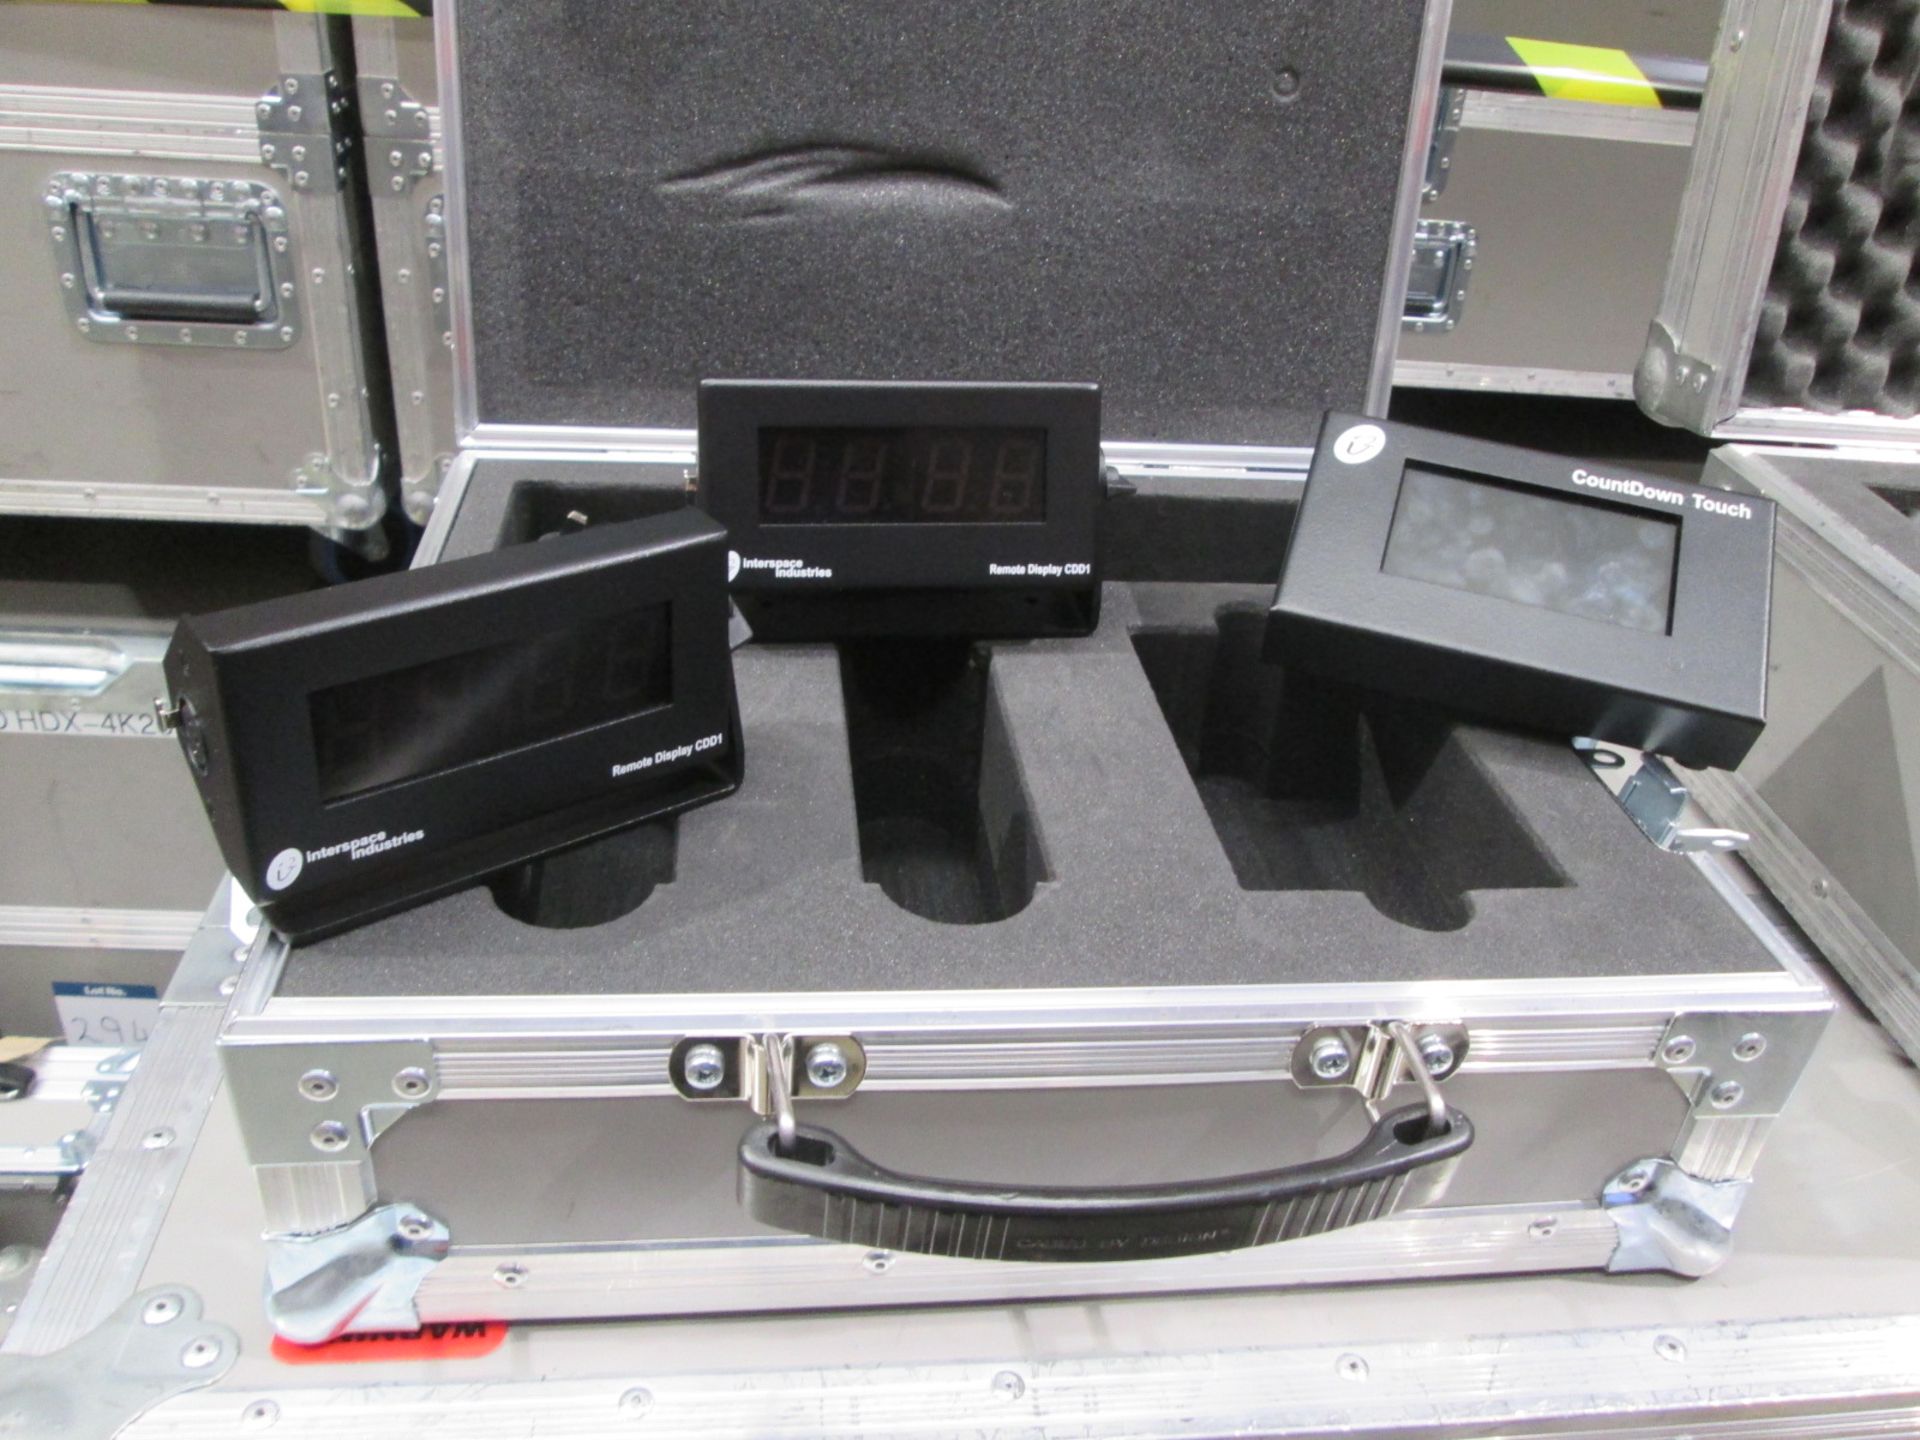 Interspace Industries Countdown Touch with 2 x CDD1 remote Displays, In flight case (Qty 2)